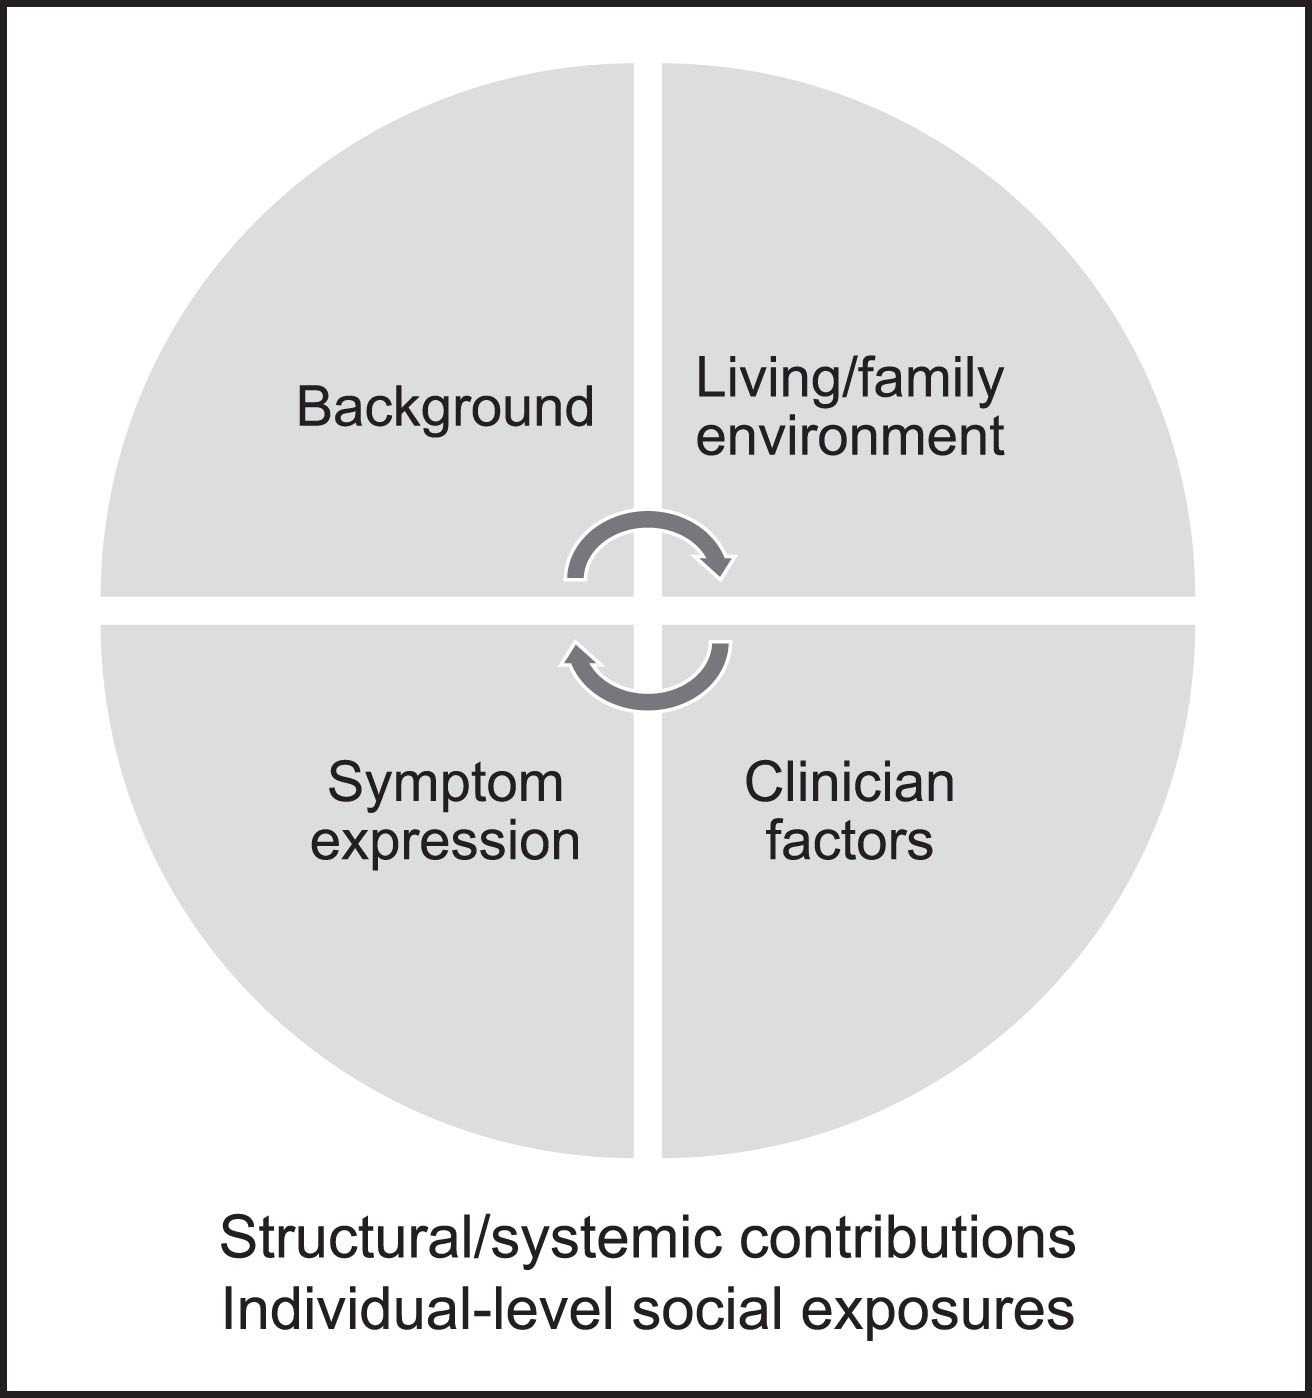 Under-diagnosis of dementia with Lewy bodies (DLB) occurs on the background of structural and systemic contributions to health (e.g., socioeconomic status, education, structural racism) and individual-level social exposures (e.g., social interactions, discrimination) which potentially affect multiple aspects of DLB diagnosis including dementia risk, epigenetics, sleep patterns, and access to care. An individual’s cultural or early life background or social origins may inform how they construe symptoms, such as the possibility that parkinsonism is interpreted as normal aging. Family and caregiver environment can also impact symptom recognition. For example, individuals without spousal caregivers may be less likely to have identified REM sleep behavior disorder. It is unclear whether race affects presentation of DLB symptoms, but there are reasons REM sleep behavior disorder might occur less frequently in Black adults (relating to sleep patterns) and some research suggests rates of cognitive changes and parkinsonism may differ between races. The presence of co-pathology (e.g., relating to Alzheimer’s or vascular diseases) may also affect symptom expression and recognition. In health care contexts, DLB is under-recognized across groups. In Black adults, clinicians may also mis-ascribe symptoms of DLB to other conditions such as Alzheimer’s disease, cerebrovascular disease, and/or primary psychiatric conditions. Improving DLB recognition in Black adults will require research to investigate reasons for diagnostic disparities and education to increase identification of core symptoms in this population.